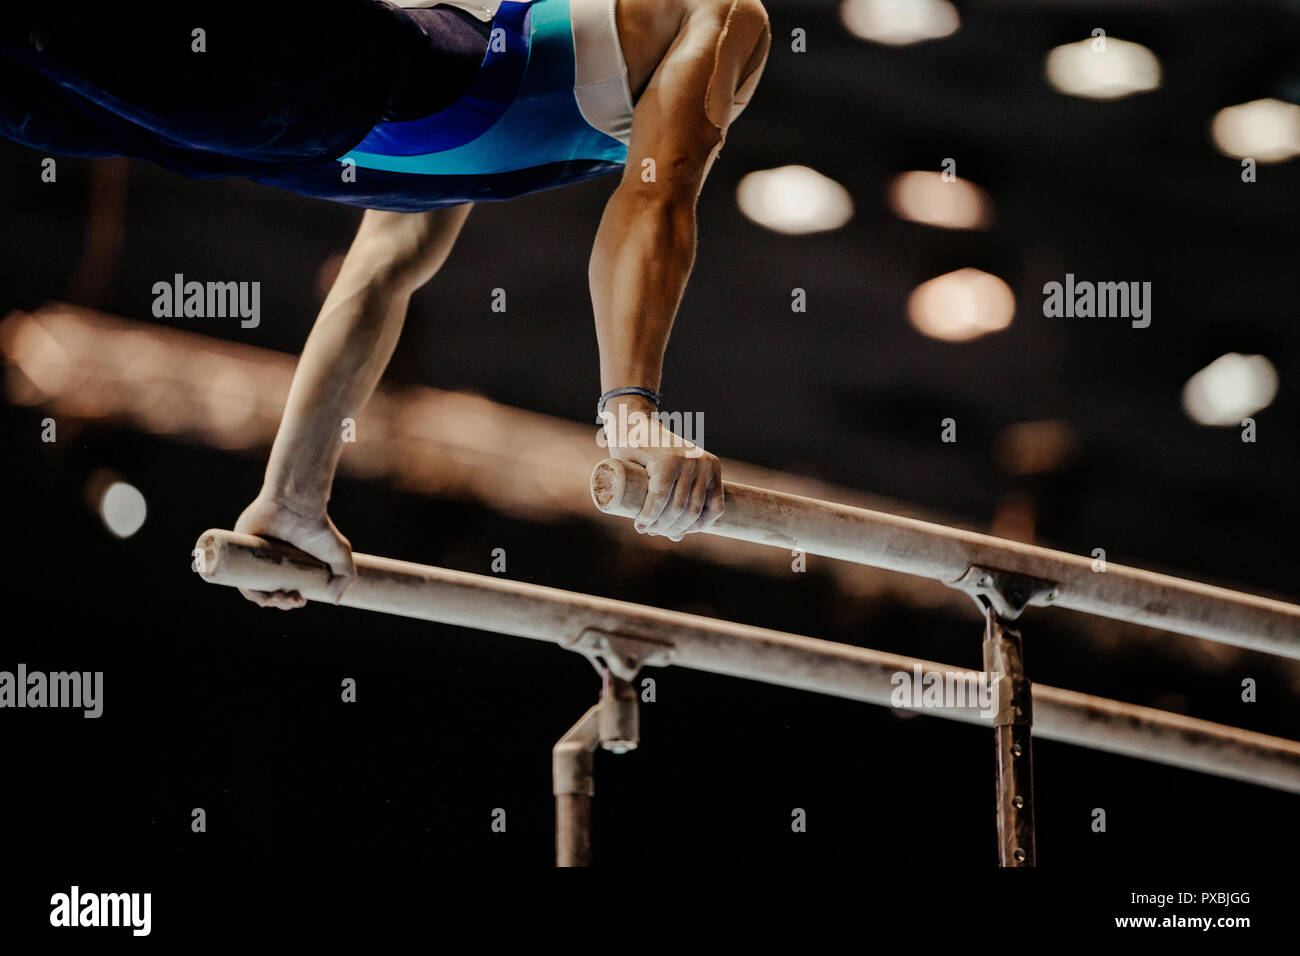 gymnast exercise parallel bars in artistic gymnastics Stock Photo